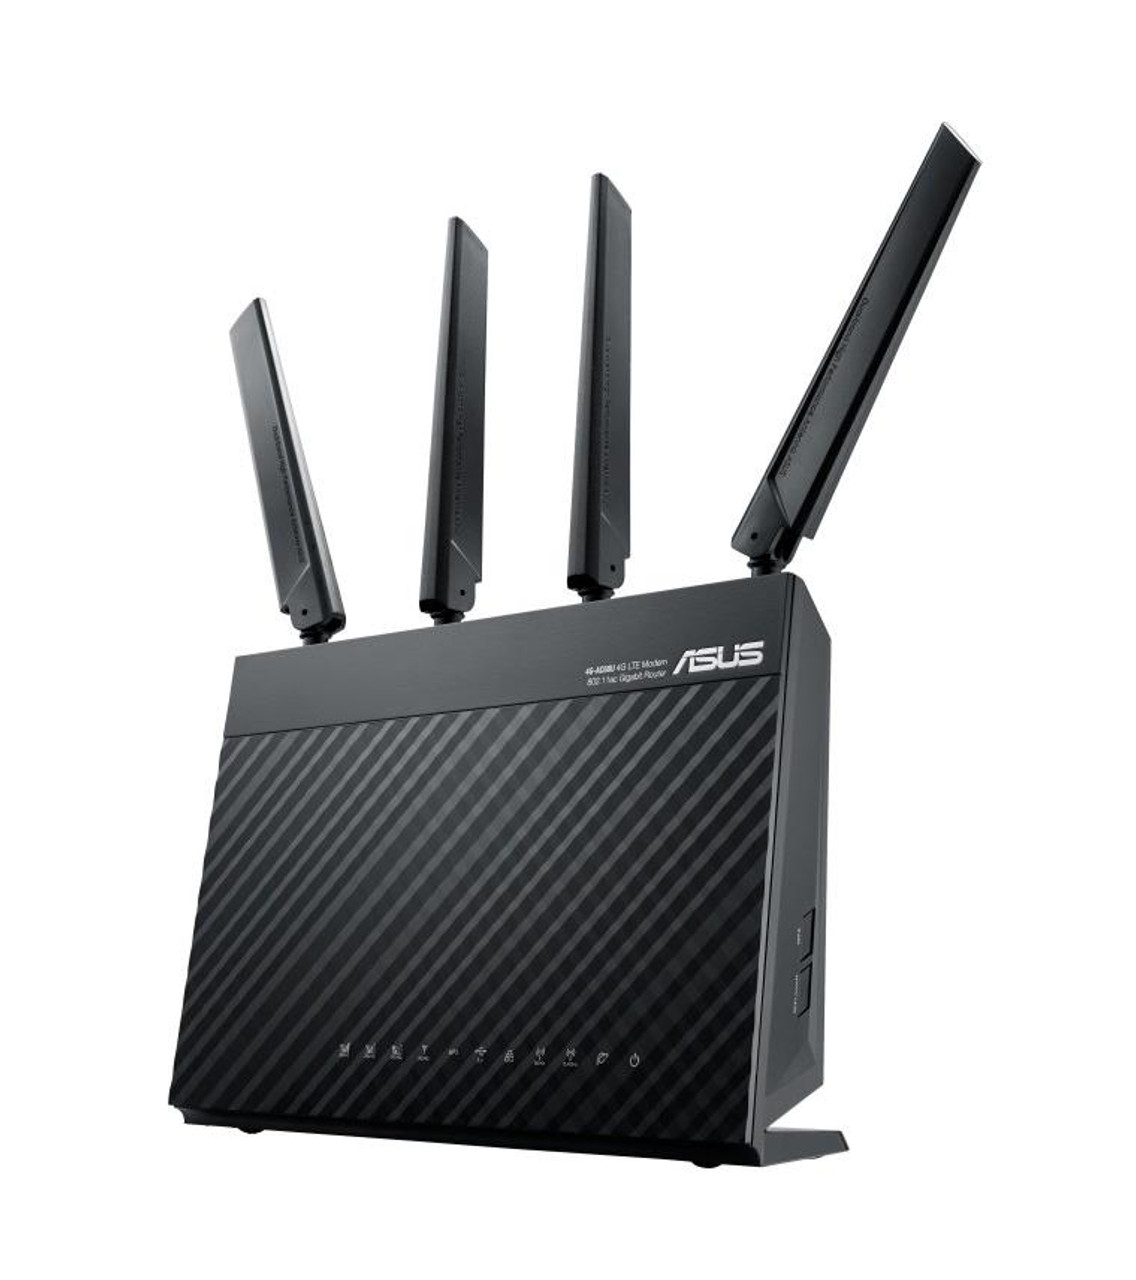 90IG03R1-BM2000 ASUS AC1900 600 plus 1300Mbps Dual Band LTE 4-Ports RJ-45 with 1x WAN Port and 1x USB 2.0 Port WiFi Modem Router (Refurbished)